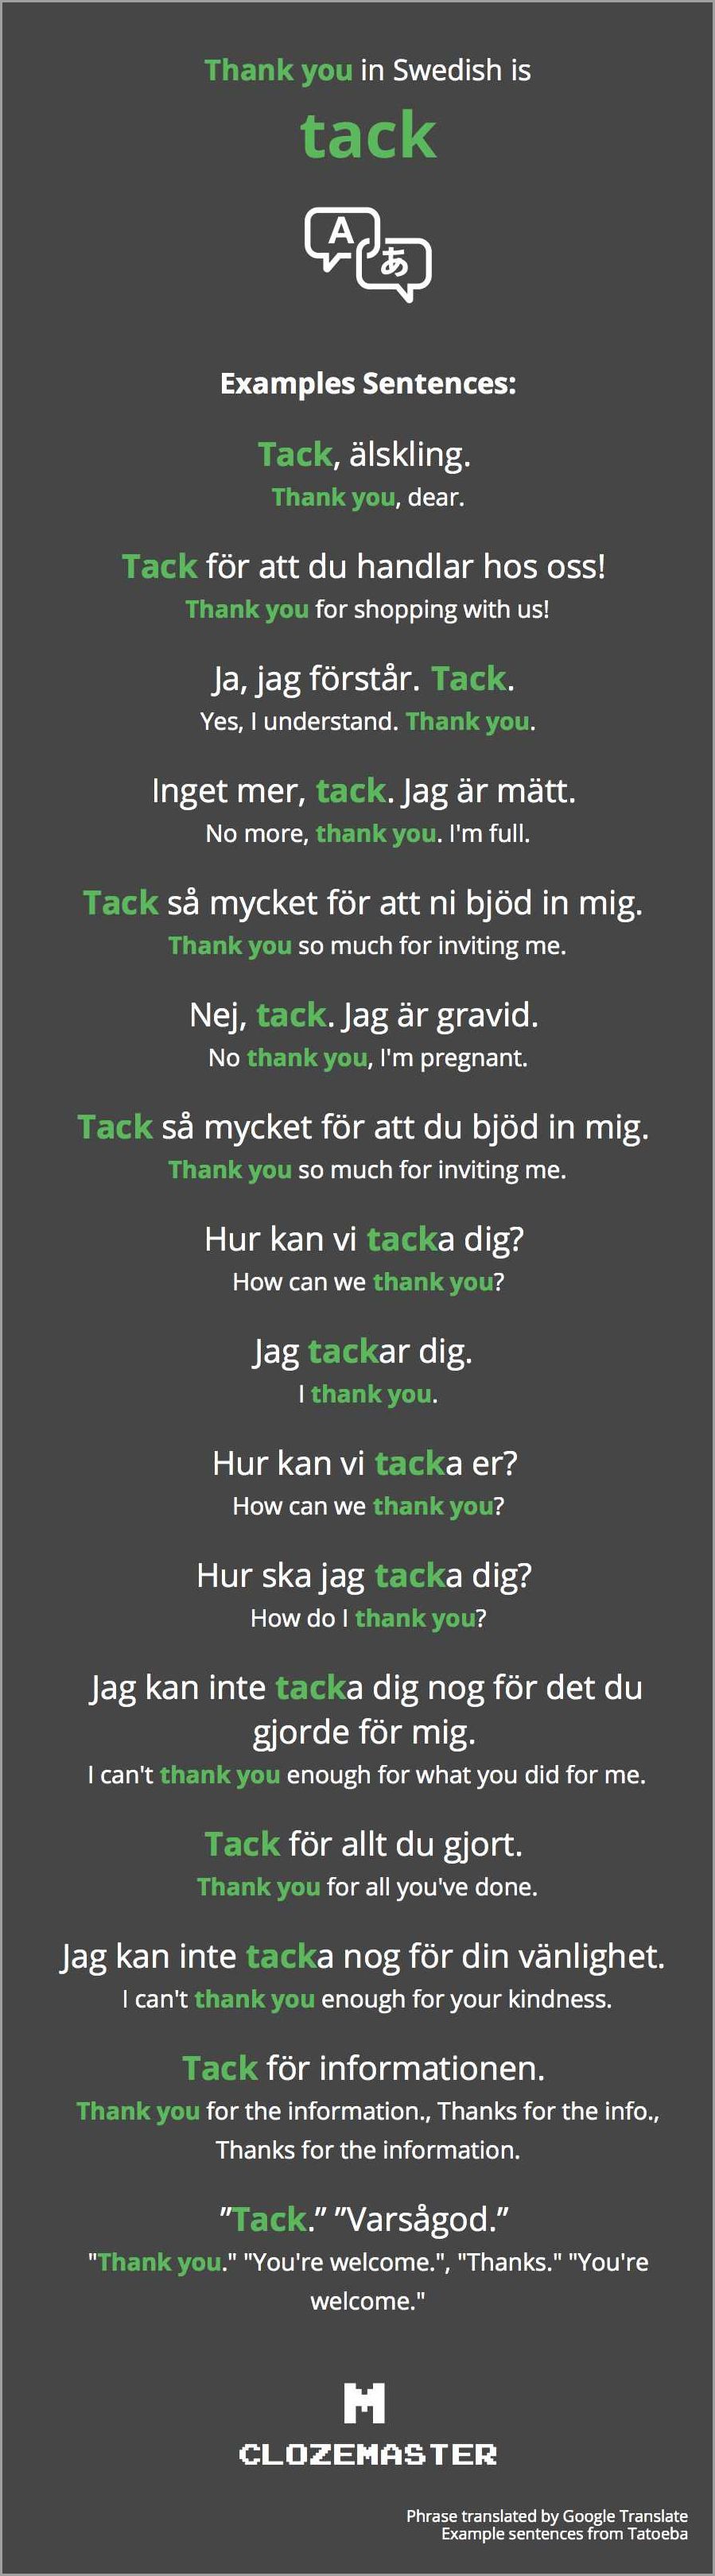 Learn How to Say Thank You in Swedish - Essential Phrases and Etiquette